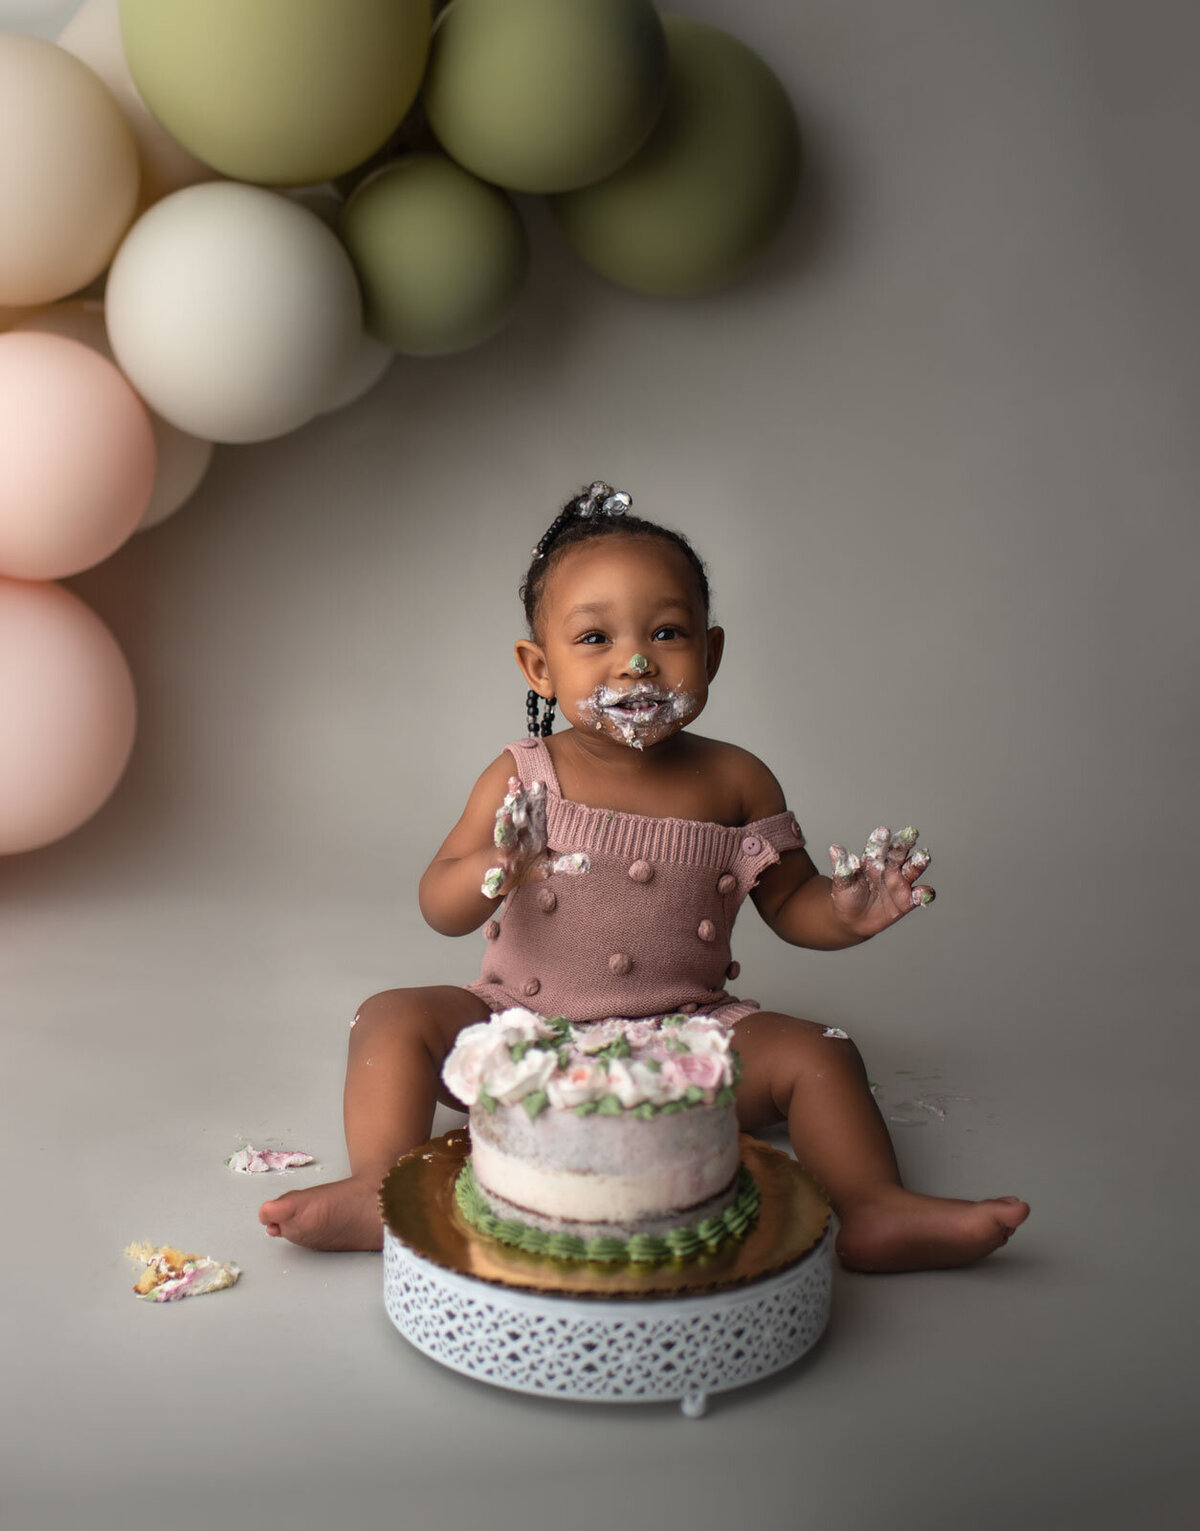 happy baby eating cake with balloons behind her